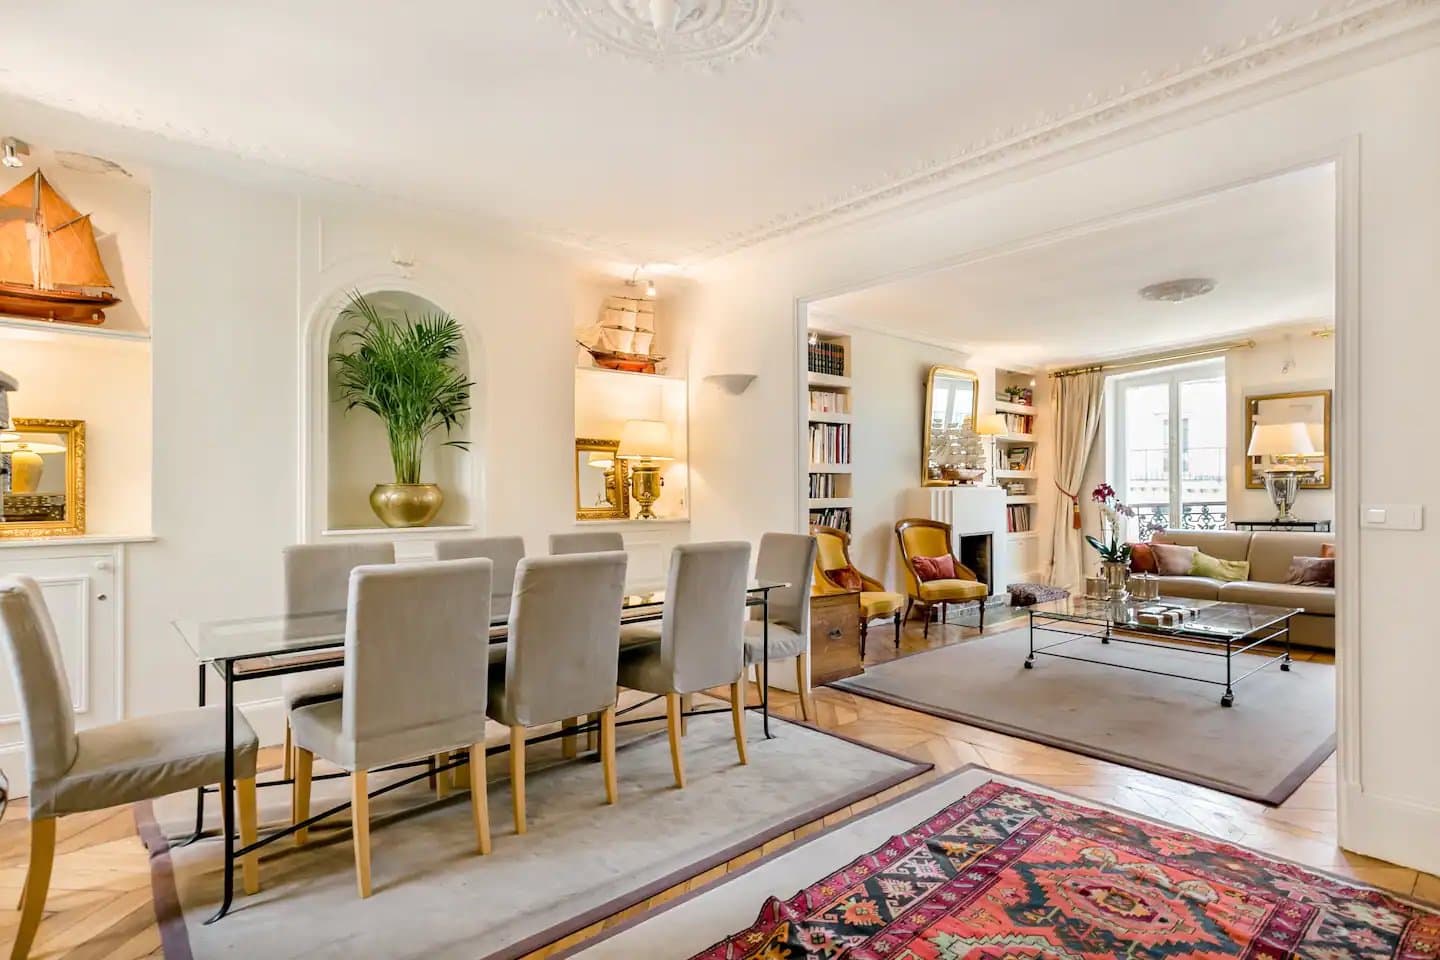 Horizontal photo of the dining and living room in Renee's Air BnB apartment in Paris.